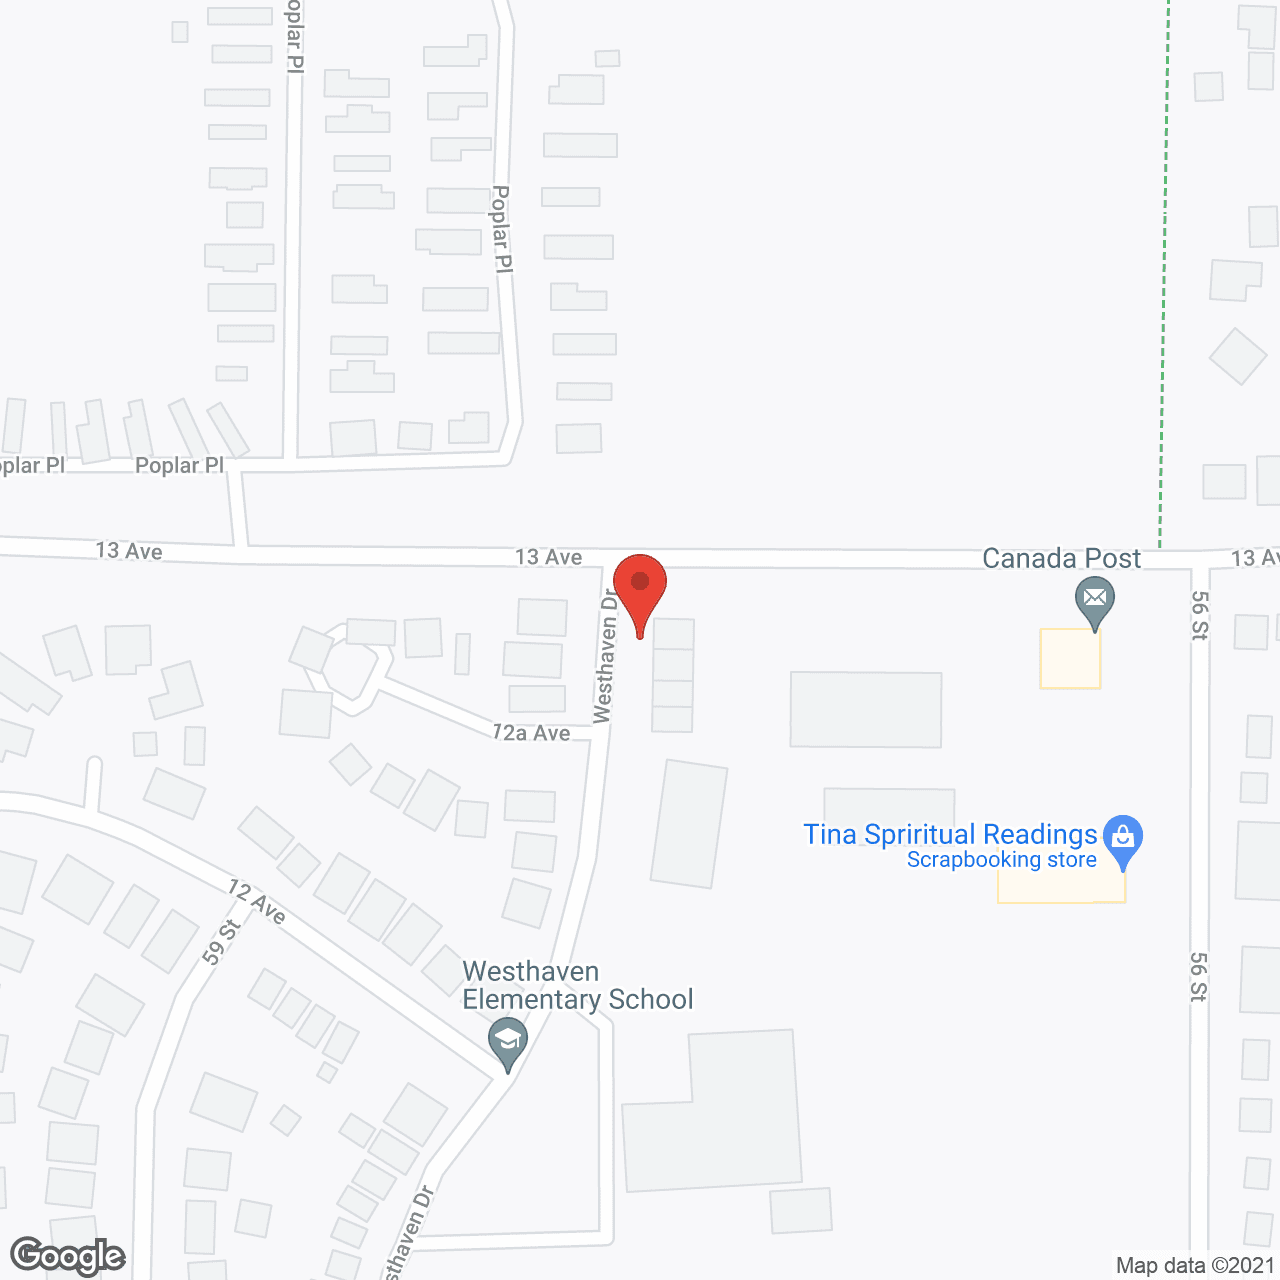 Paragon in google map